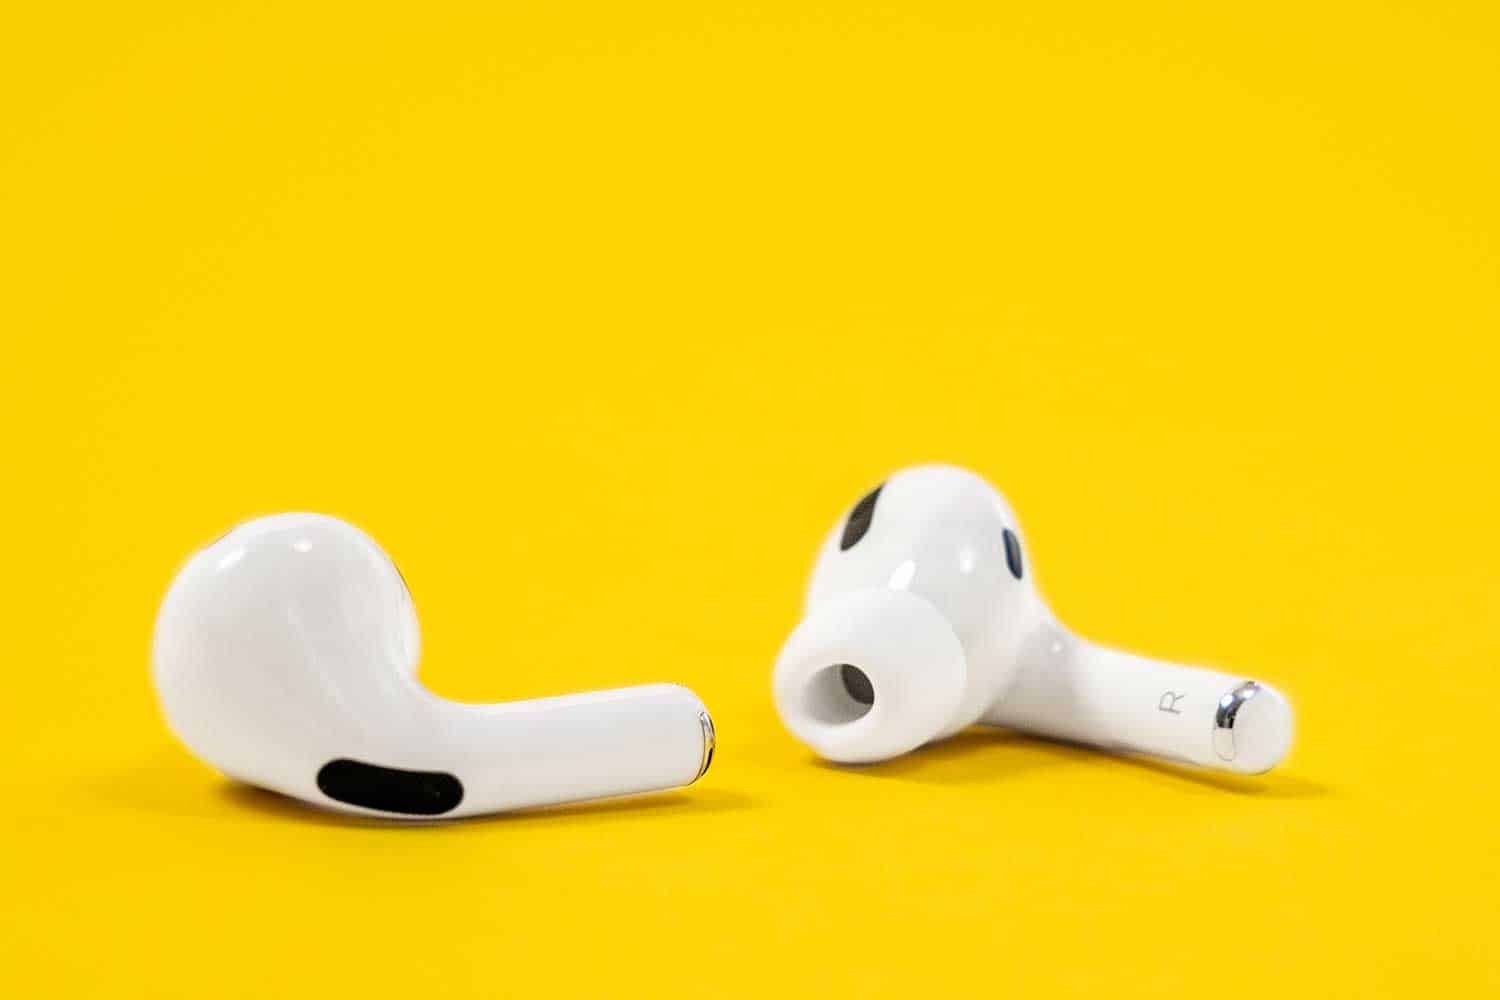 Apple AirPods Pro on a yellow background